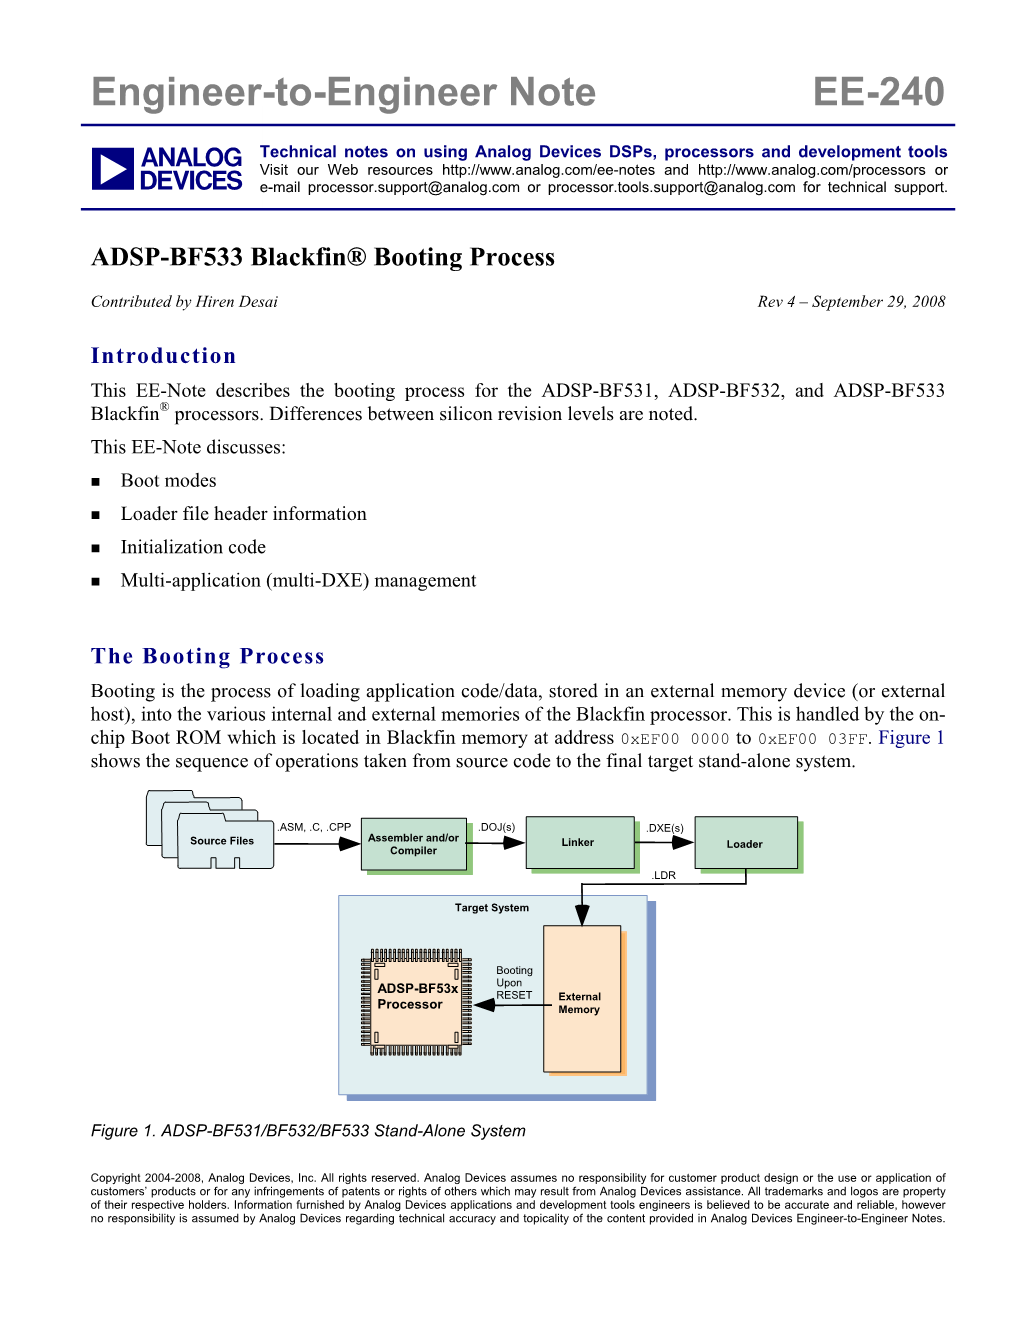 ADSP-BF533 Blackfin® Booting Process Application Note (EE-240)